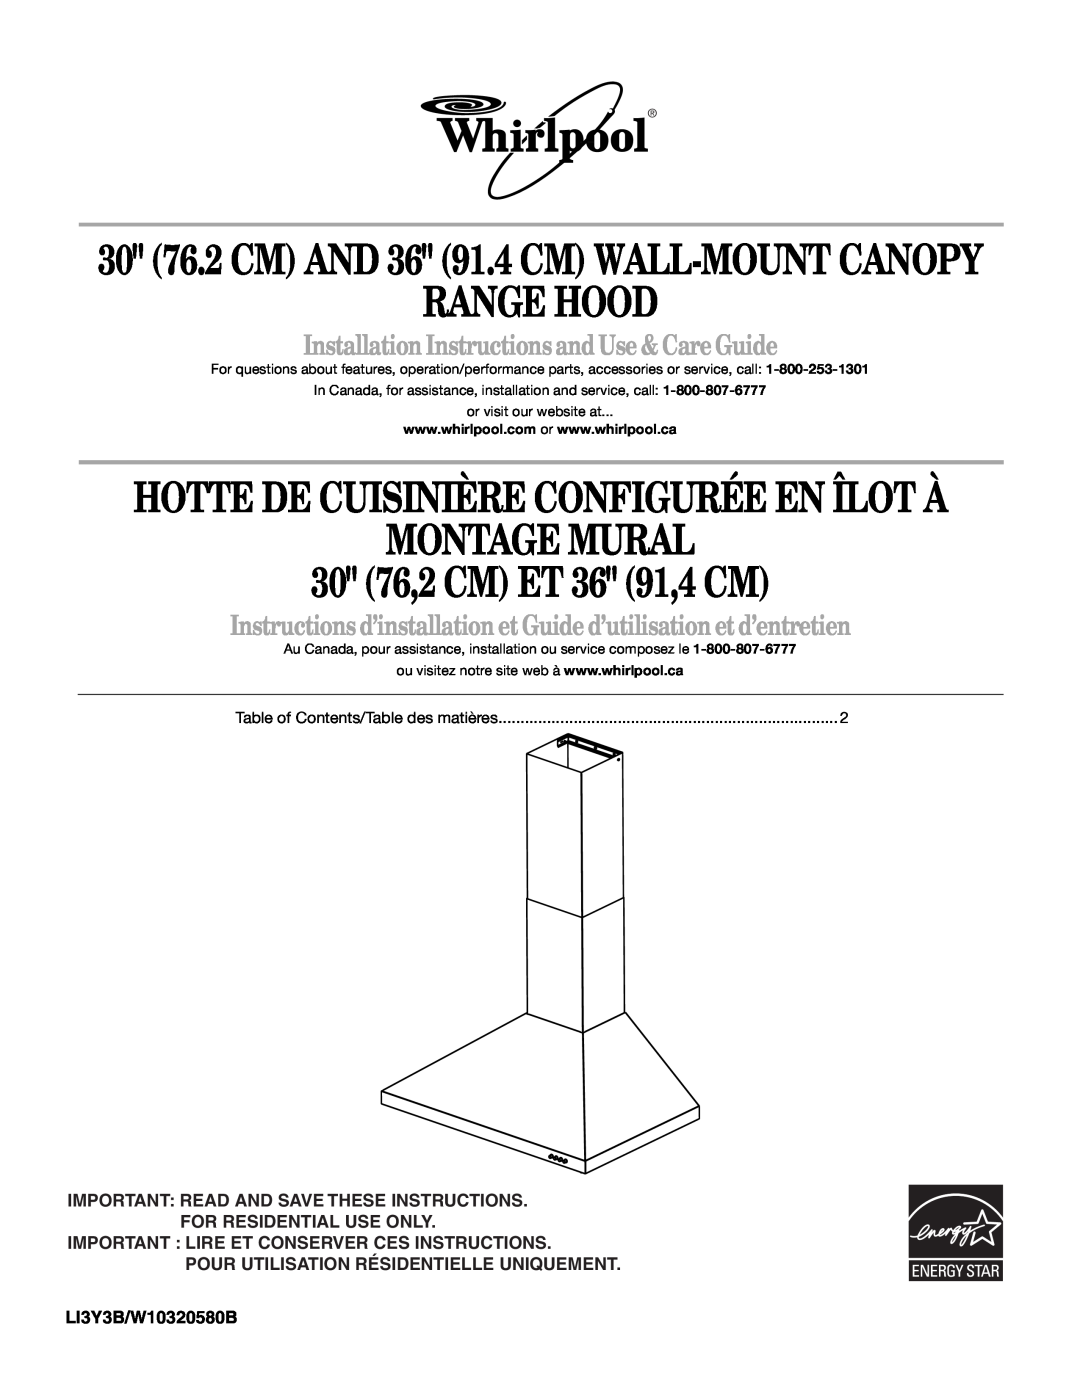 Whirlpool W10320580B installation instructions 30 76.2 CM AND 36 91.4 CM WALL-MOUNTCANOPY, For Residential Use Only 